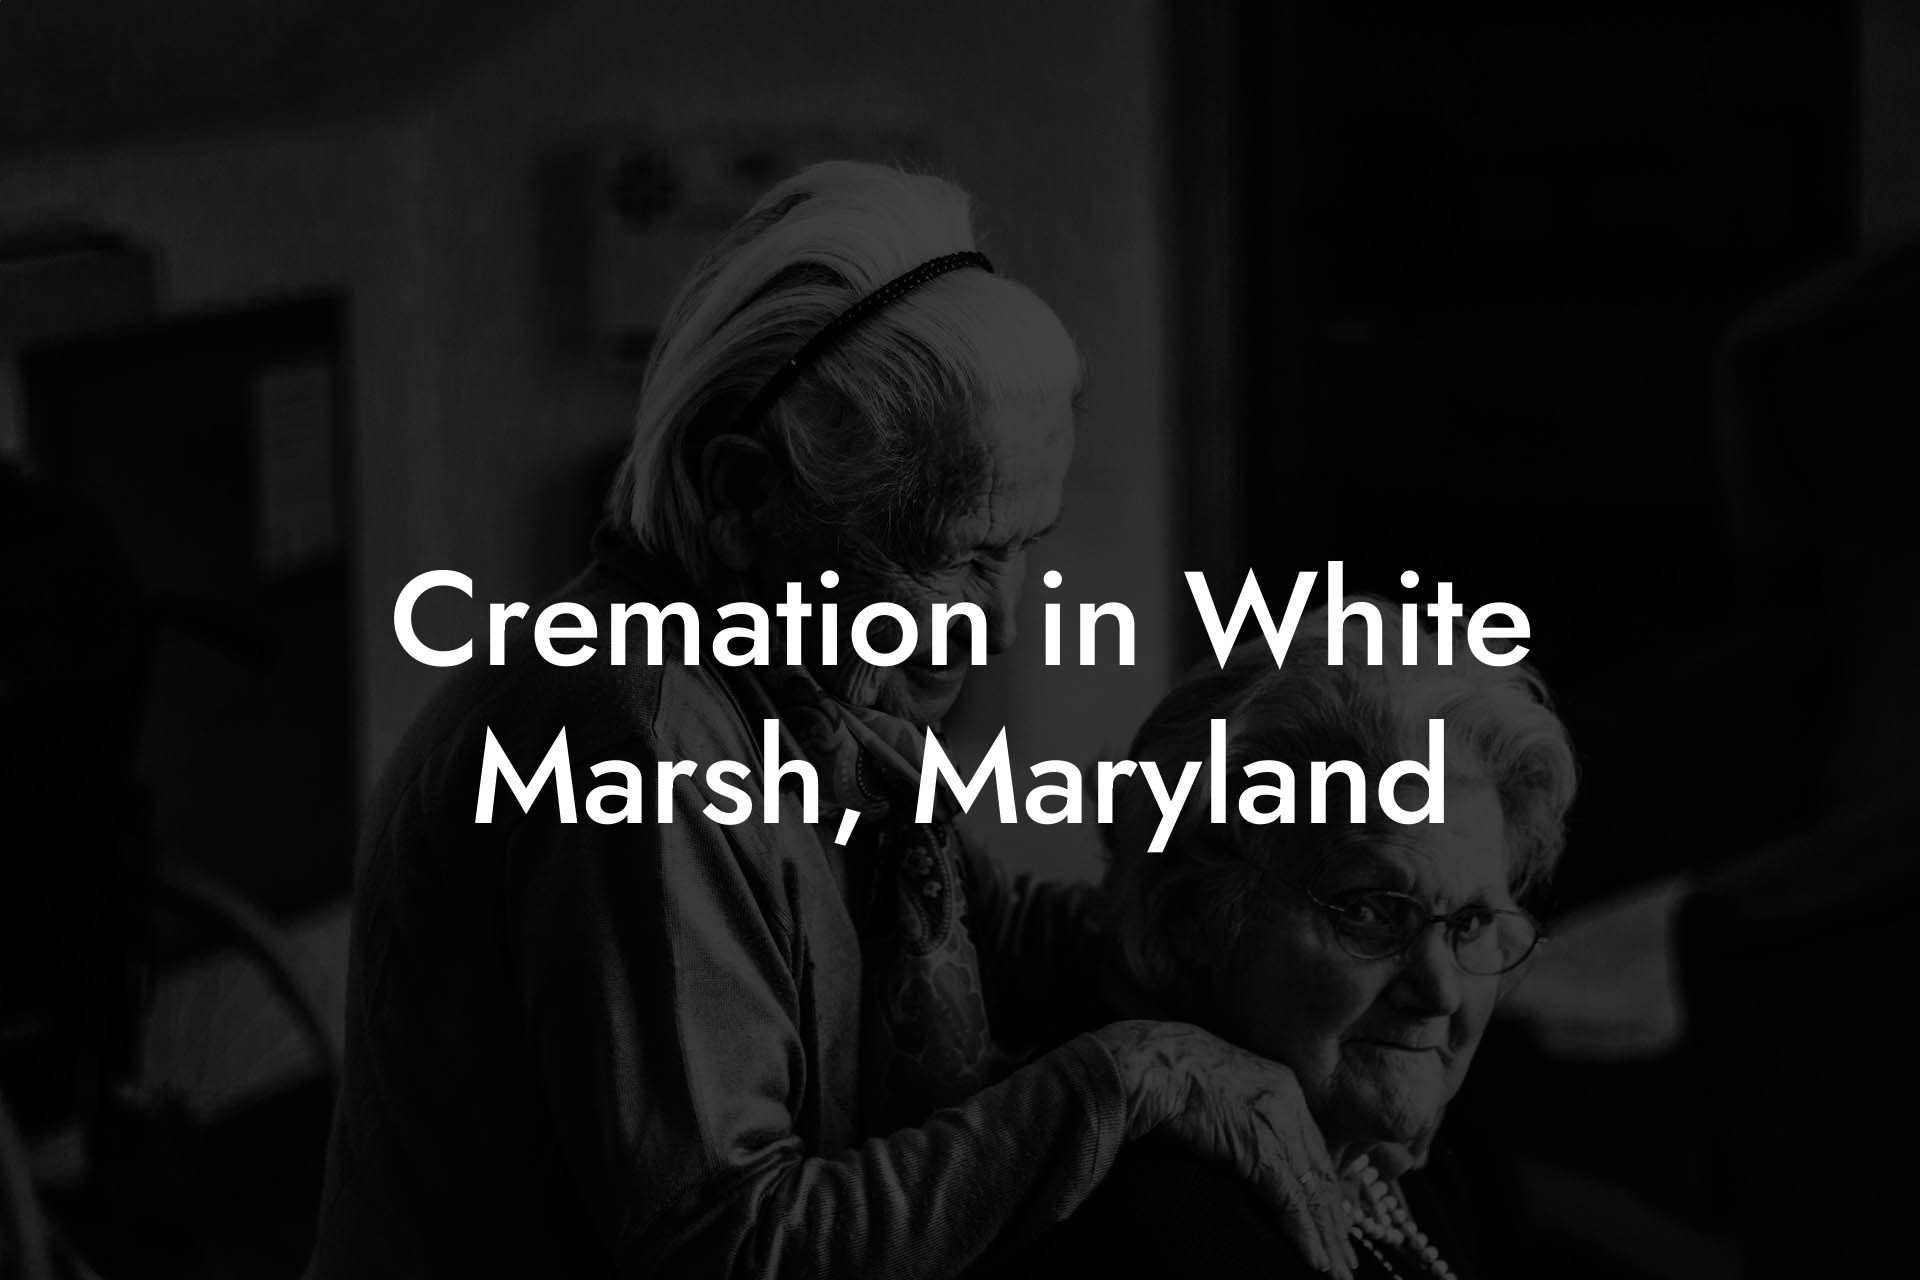 Cremation in White Marsh, Maryland